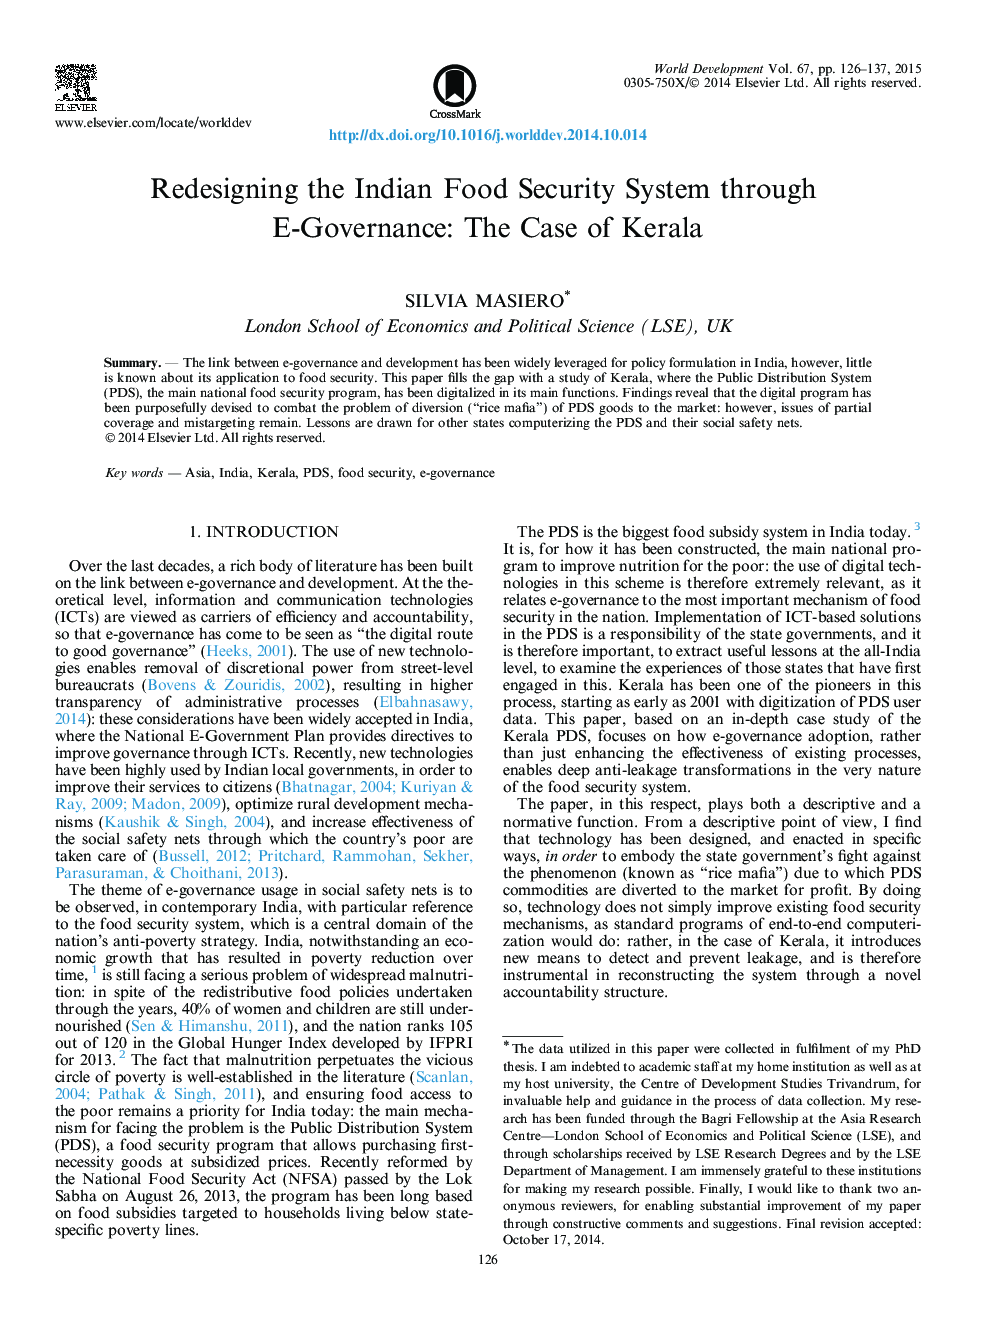 Redesigning the Indian Food Security System through E-Governance: The Case of Kerala